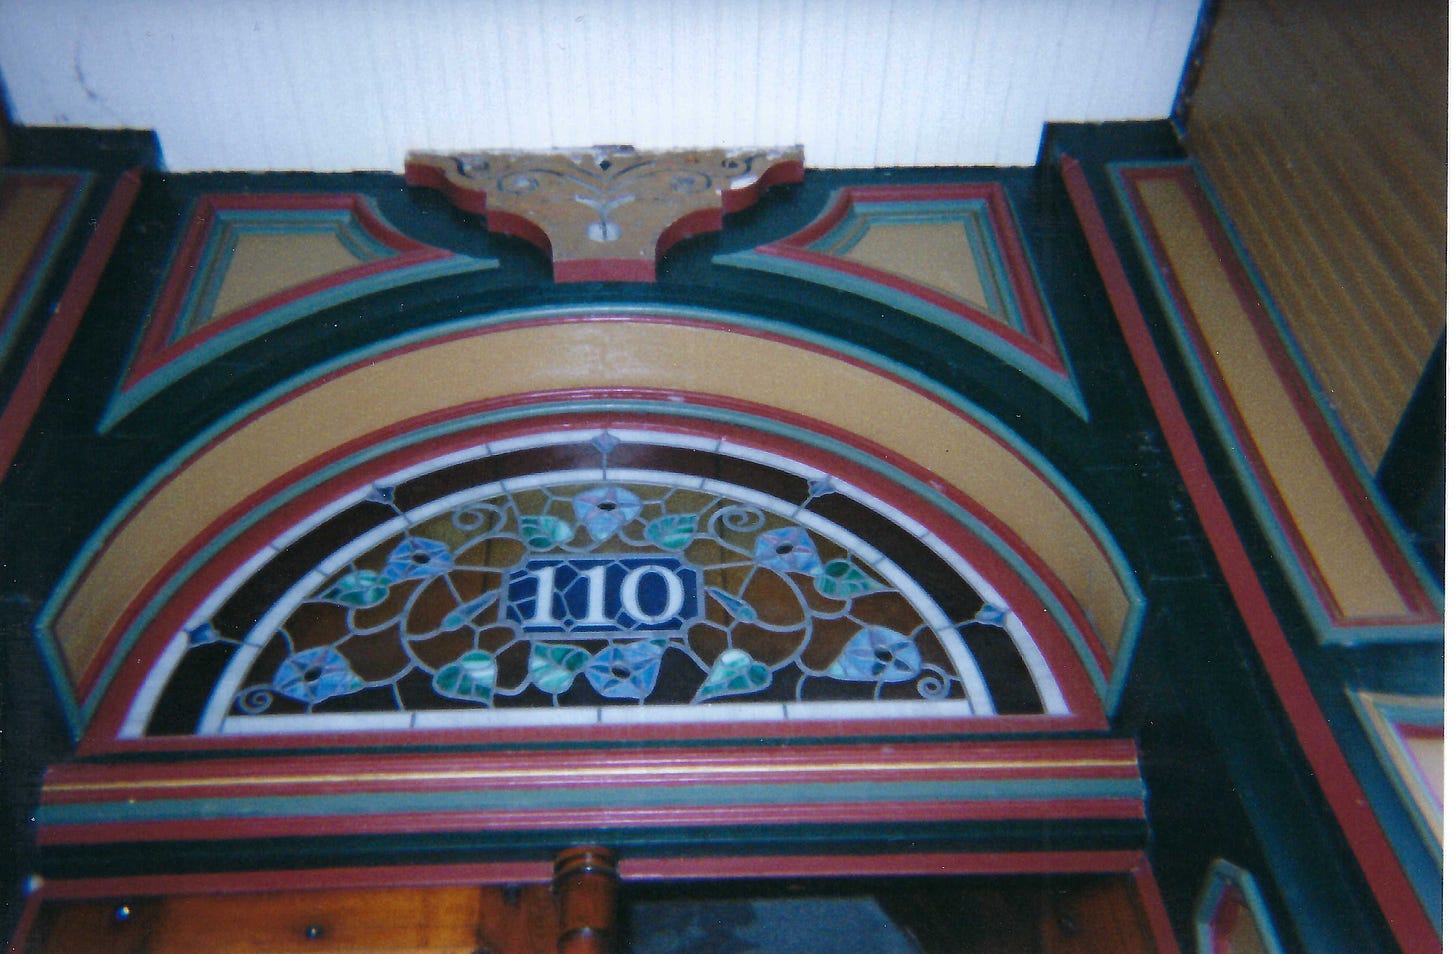 Crescent-shaped stained glass window. The window is amber, with the numbers 110 at the center. Blue flowers surround the numbers.